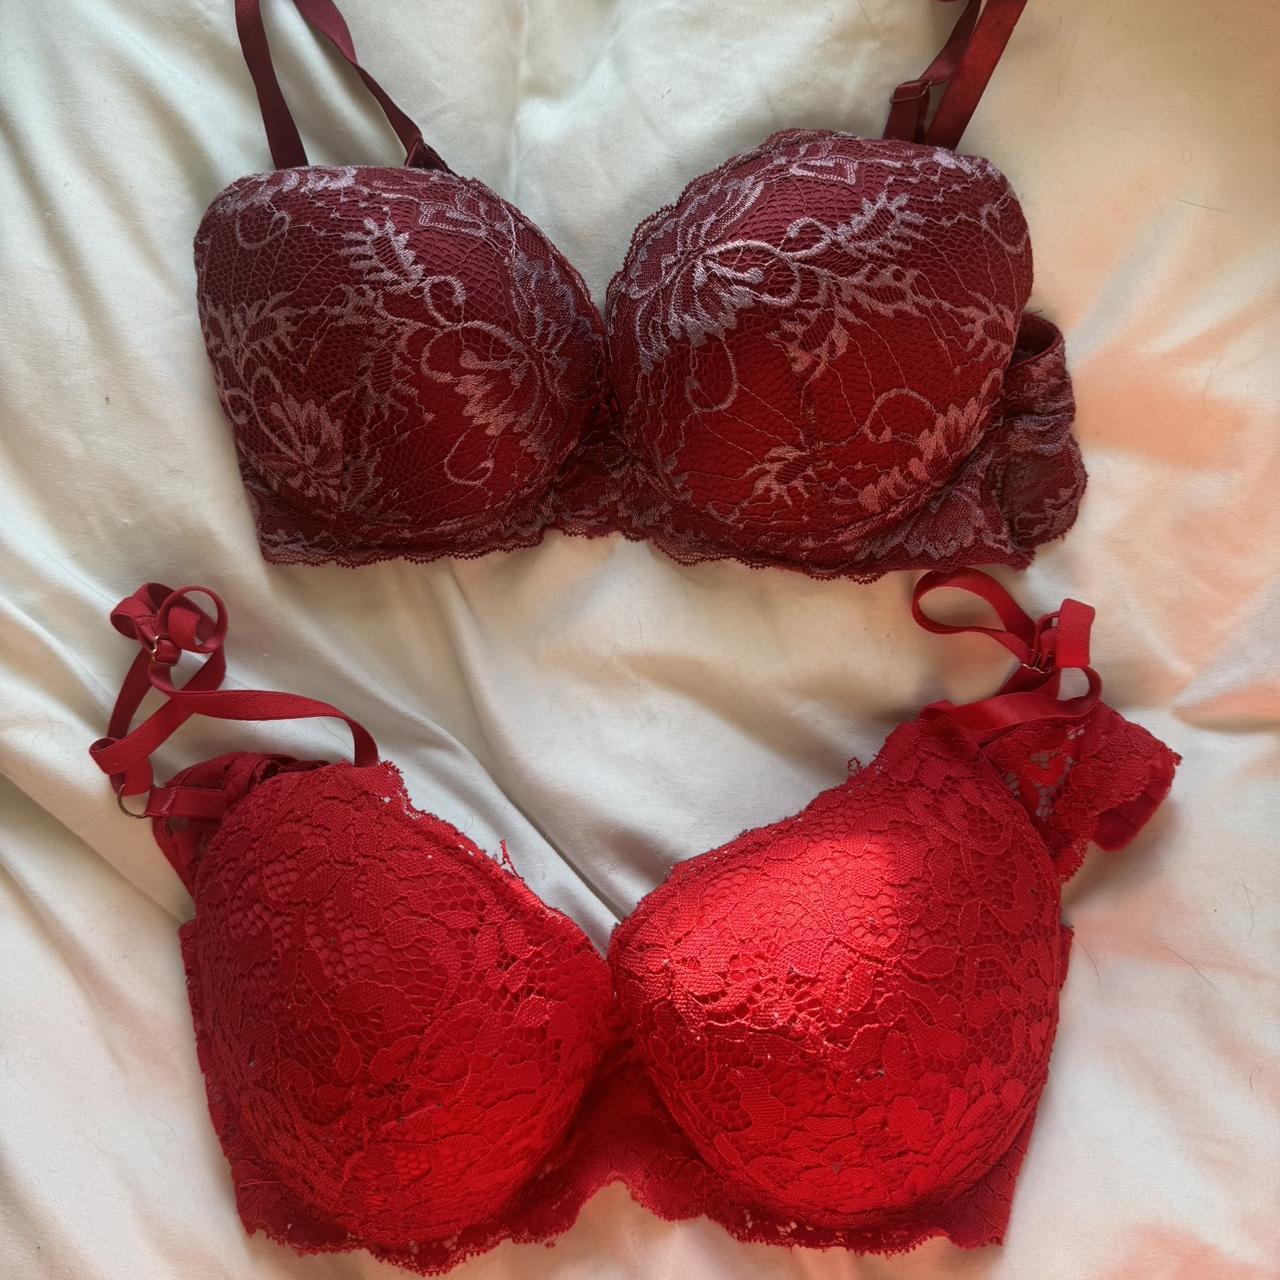 Red and burgundy 34C bra set, super cute and comfy!